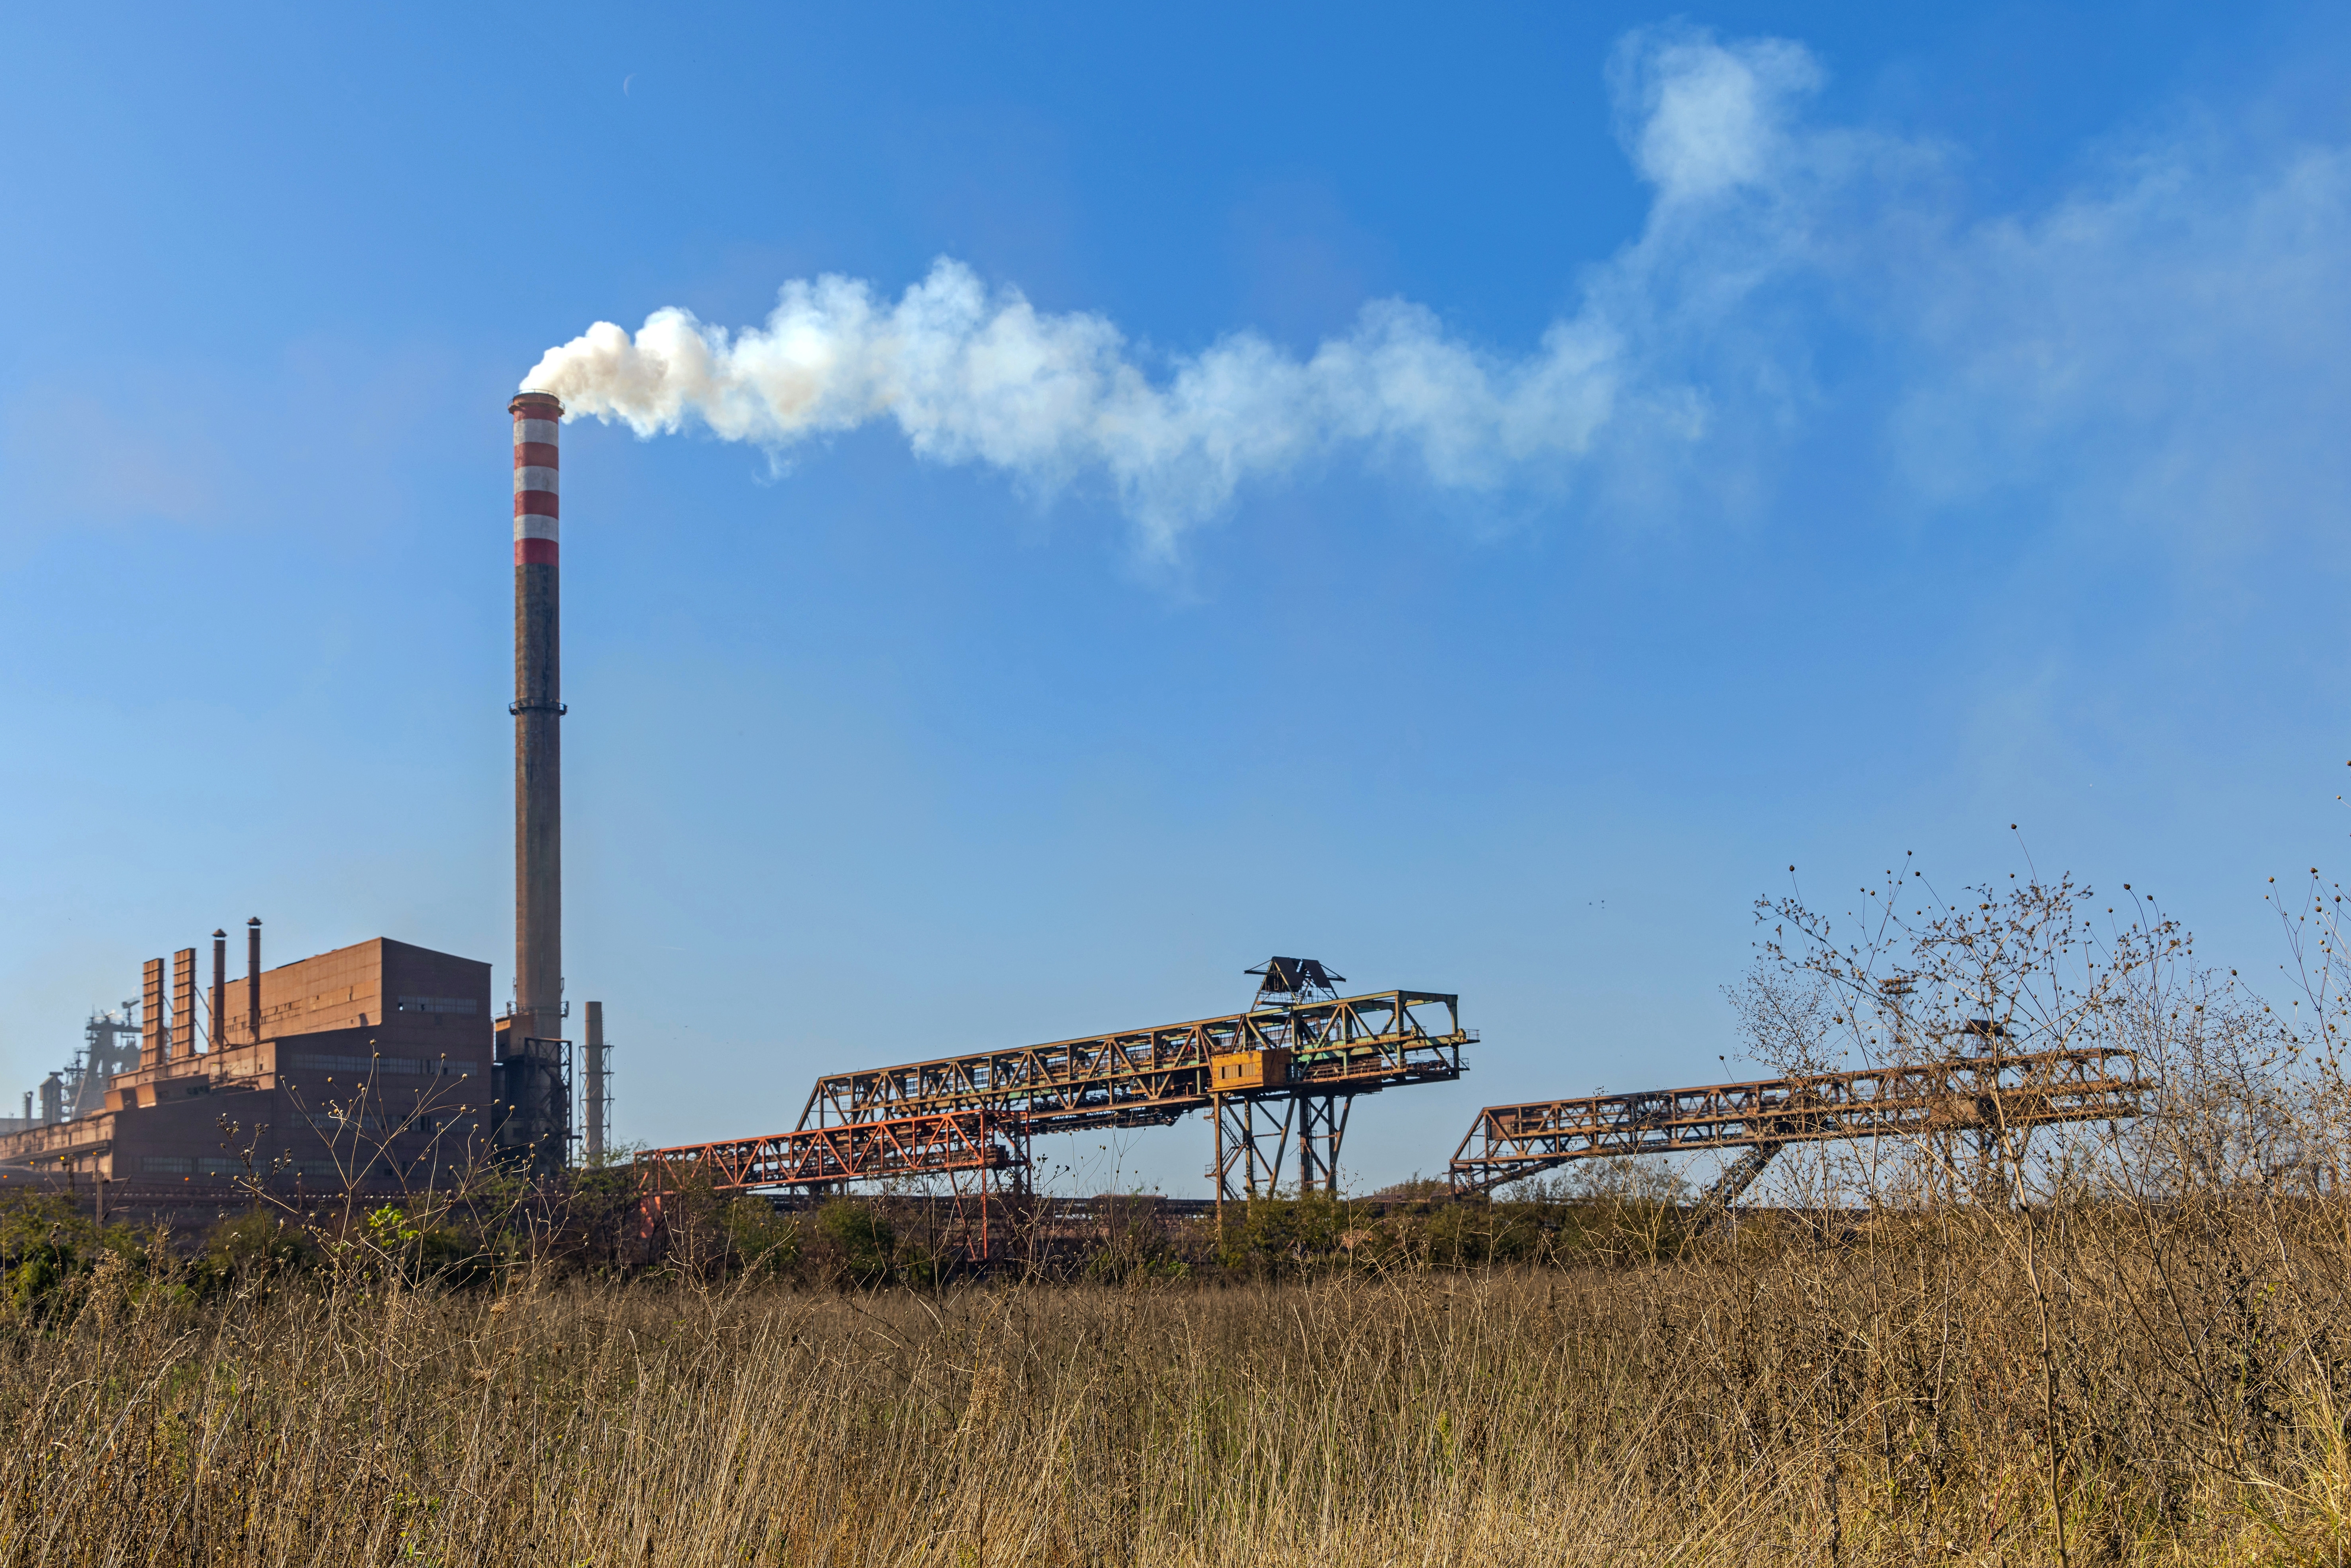 Steel Mill Factory Chimney Air Pollution Environment Problem Global Warming. Smederevo, Serbia. October 31, 2021: